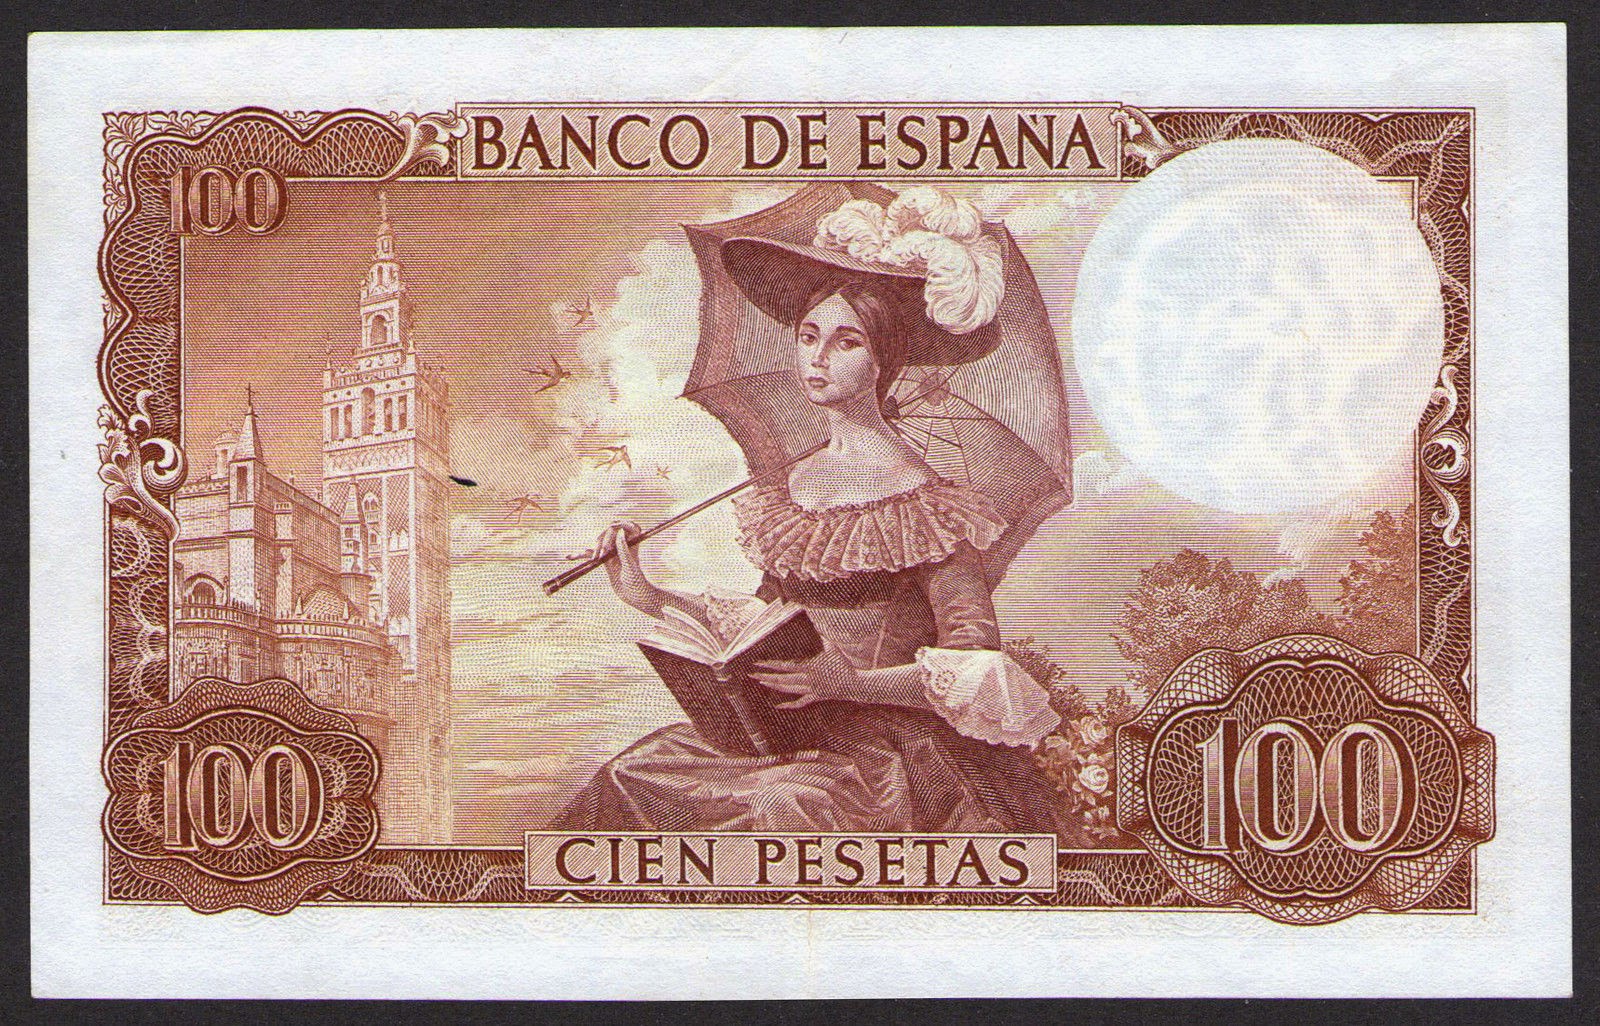 Spain money currency 100 Pesetas banknote 1965 Romantic Lady with a parasol and the view of the Cathedral of Seville